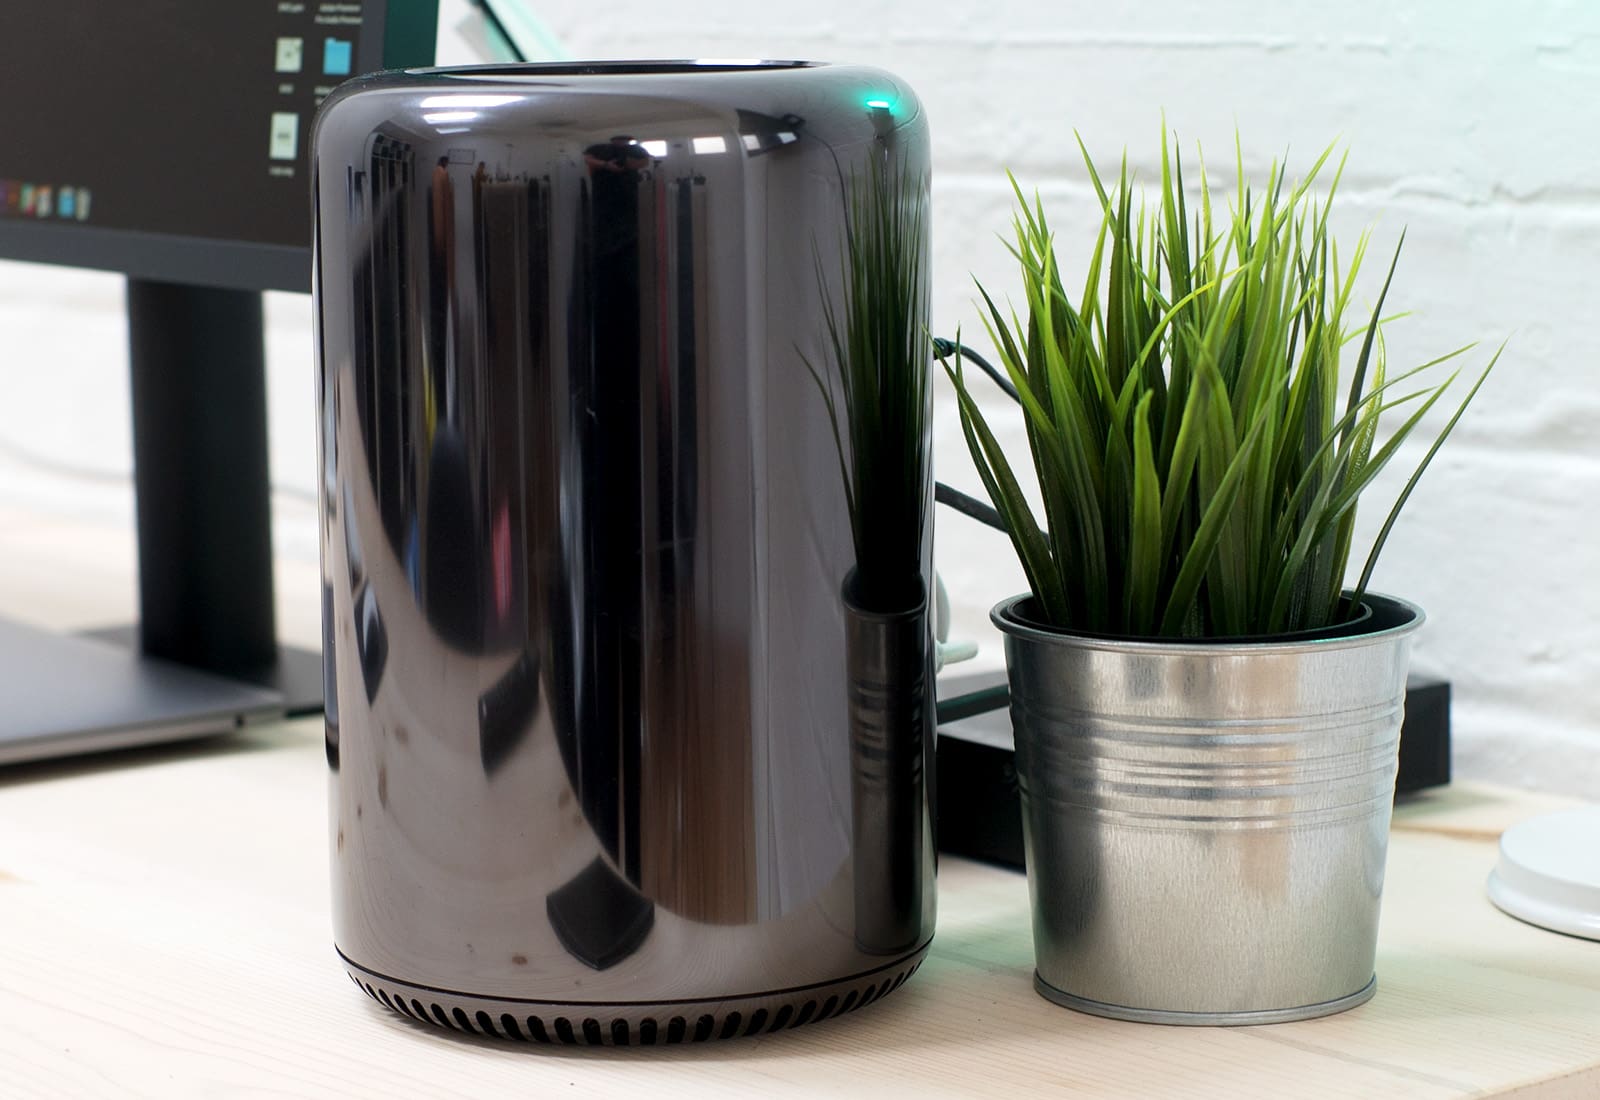 The Mac Pro is being "completely rethought."